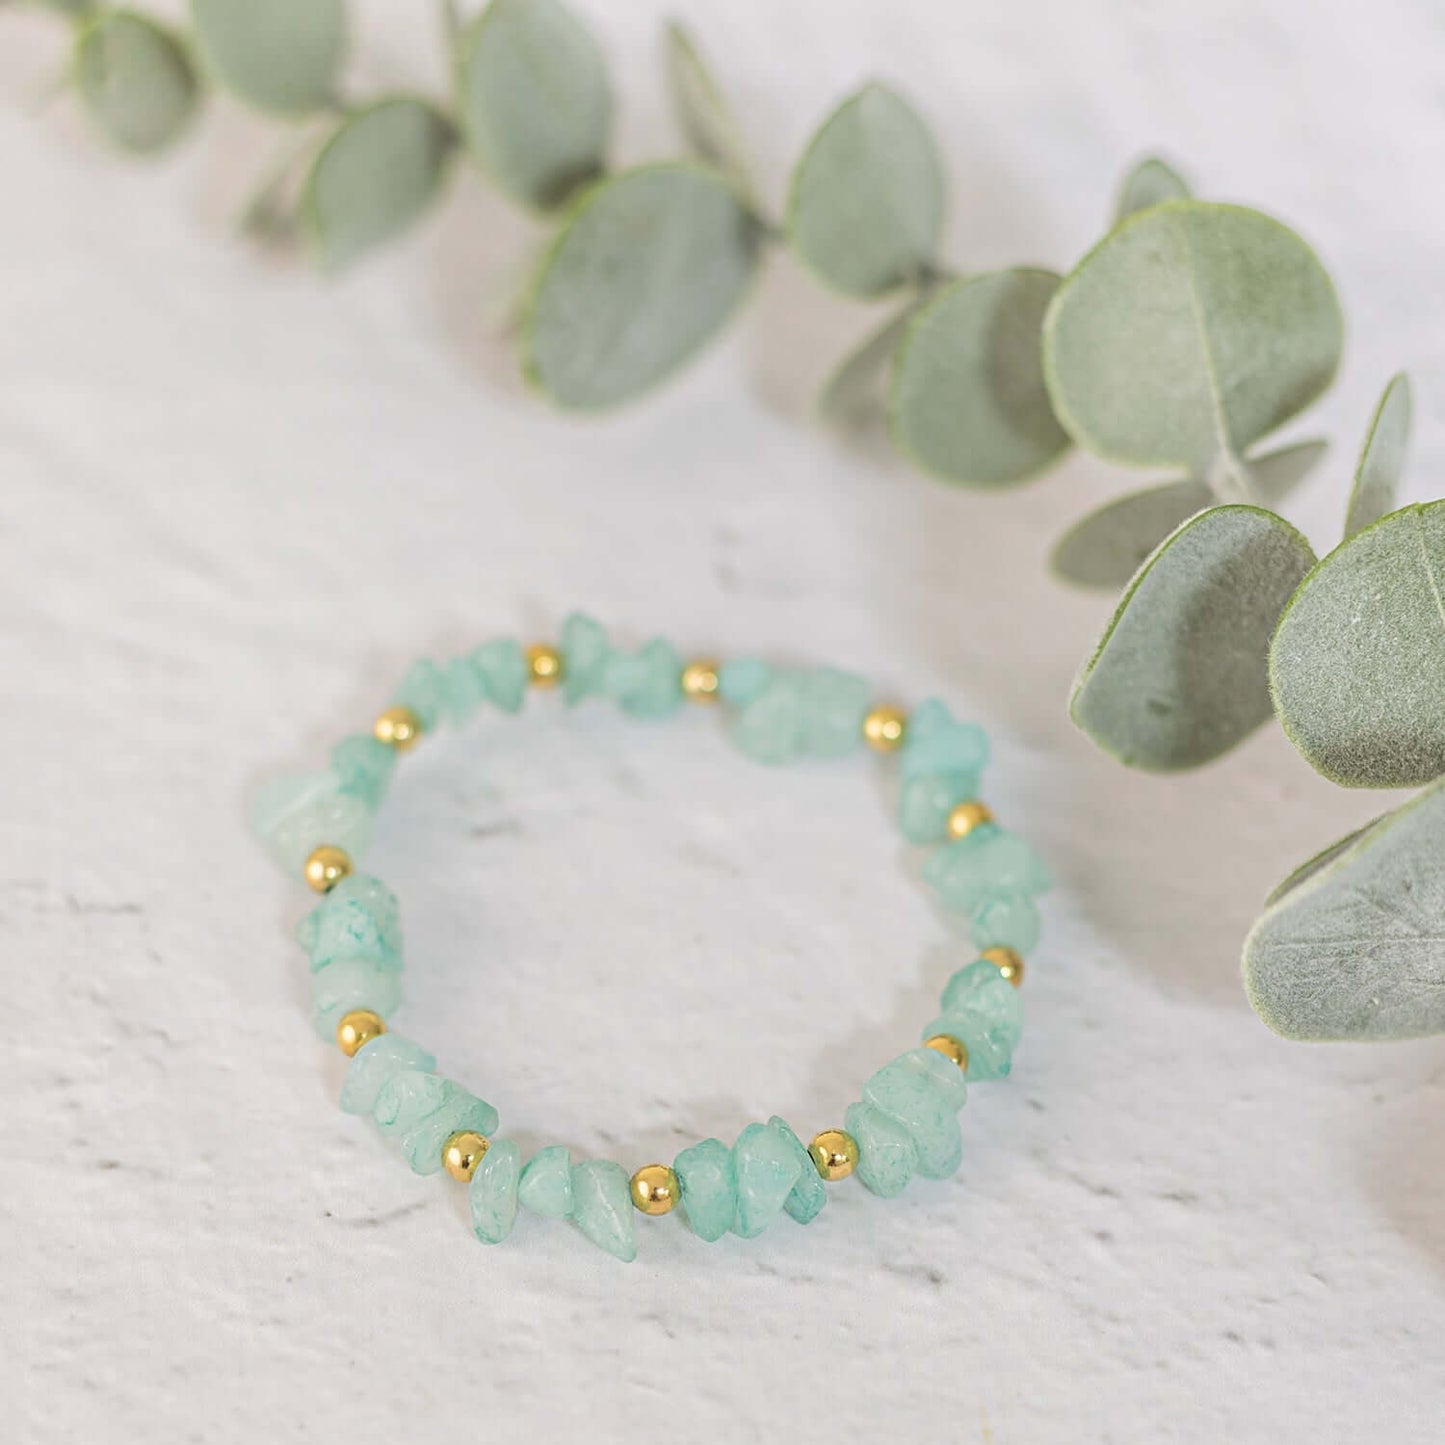 A delicate Made Here with Love Amazonite Gemstone Bracelet made of light green chips alternating with small gold beads is placed on a light gray surface. The bracelet, adorned with semi-precious gemstones, is accompanied by a sprig of eucalyptus leaves in the background, adding a natural touch to the scene.